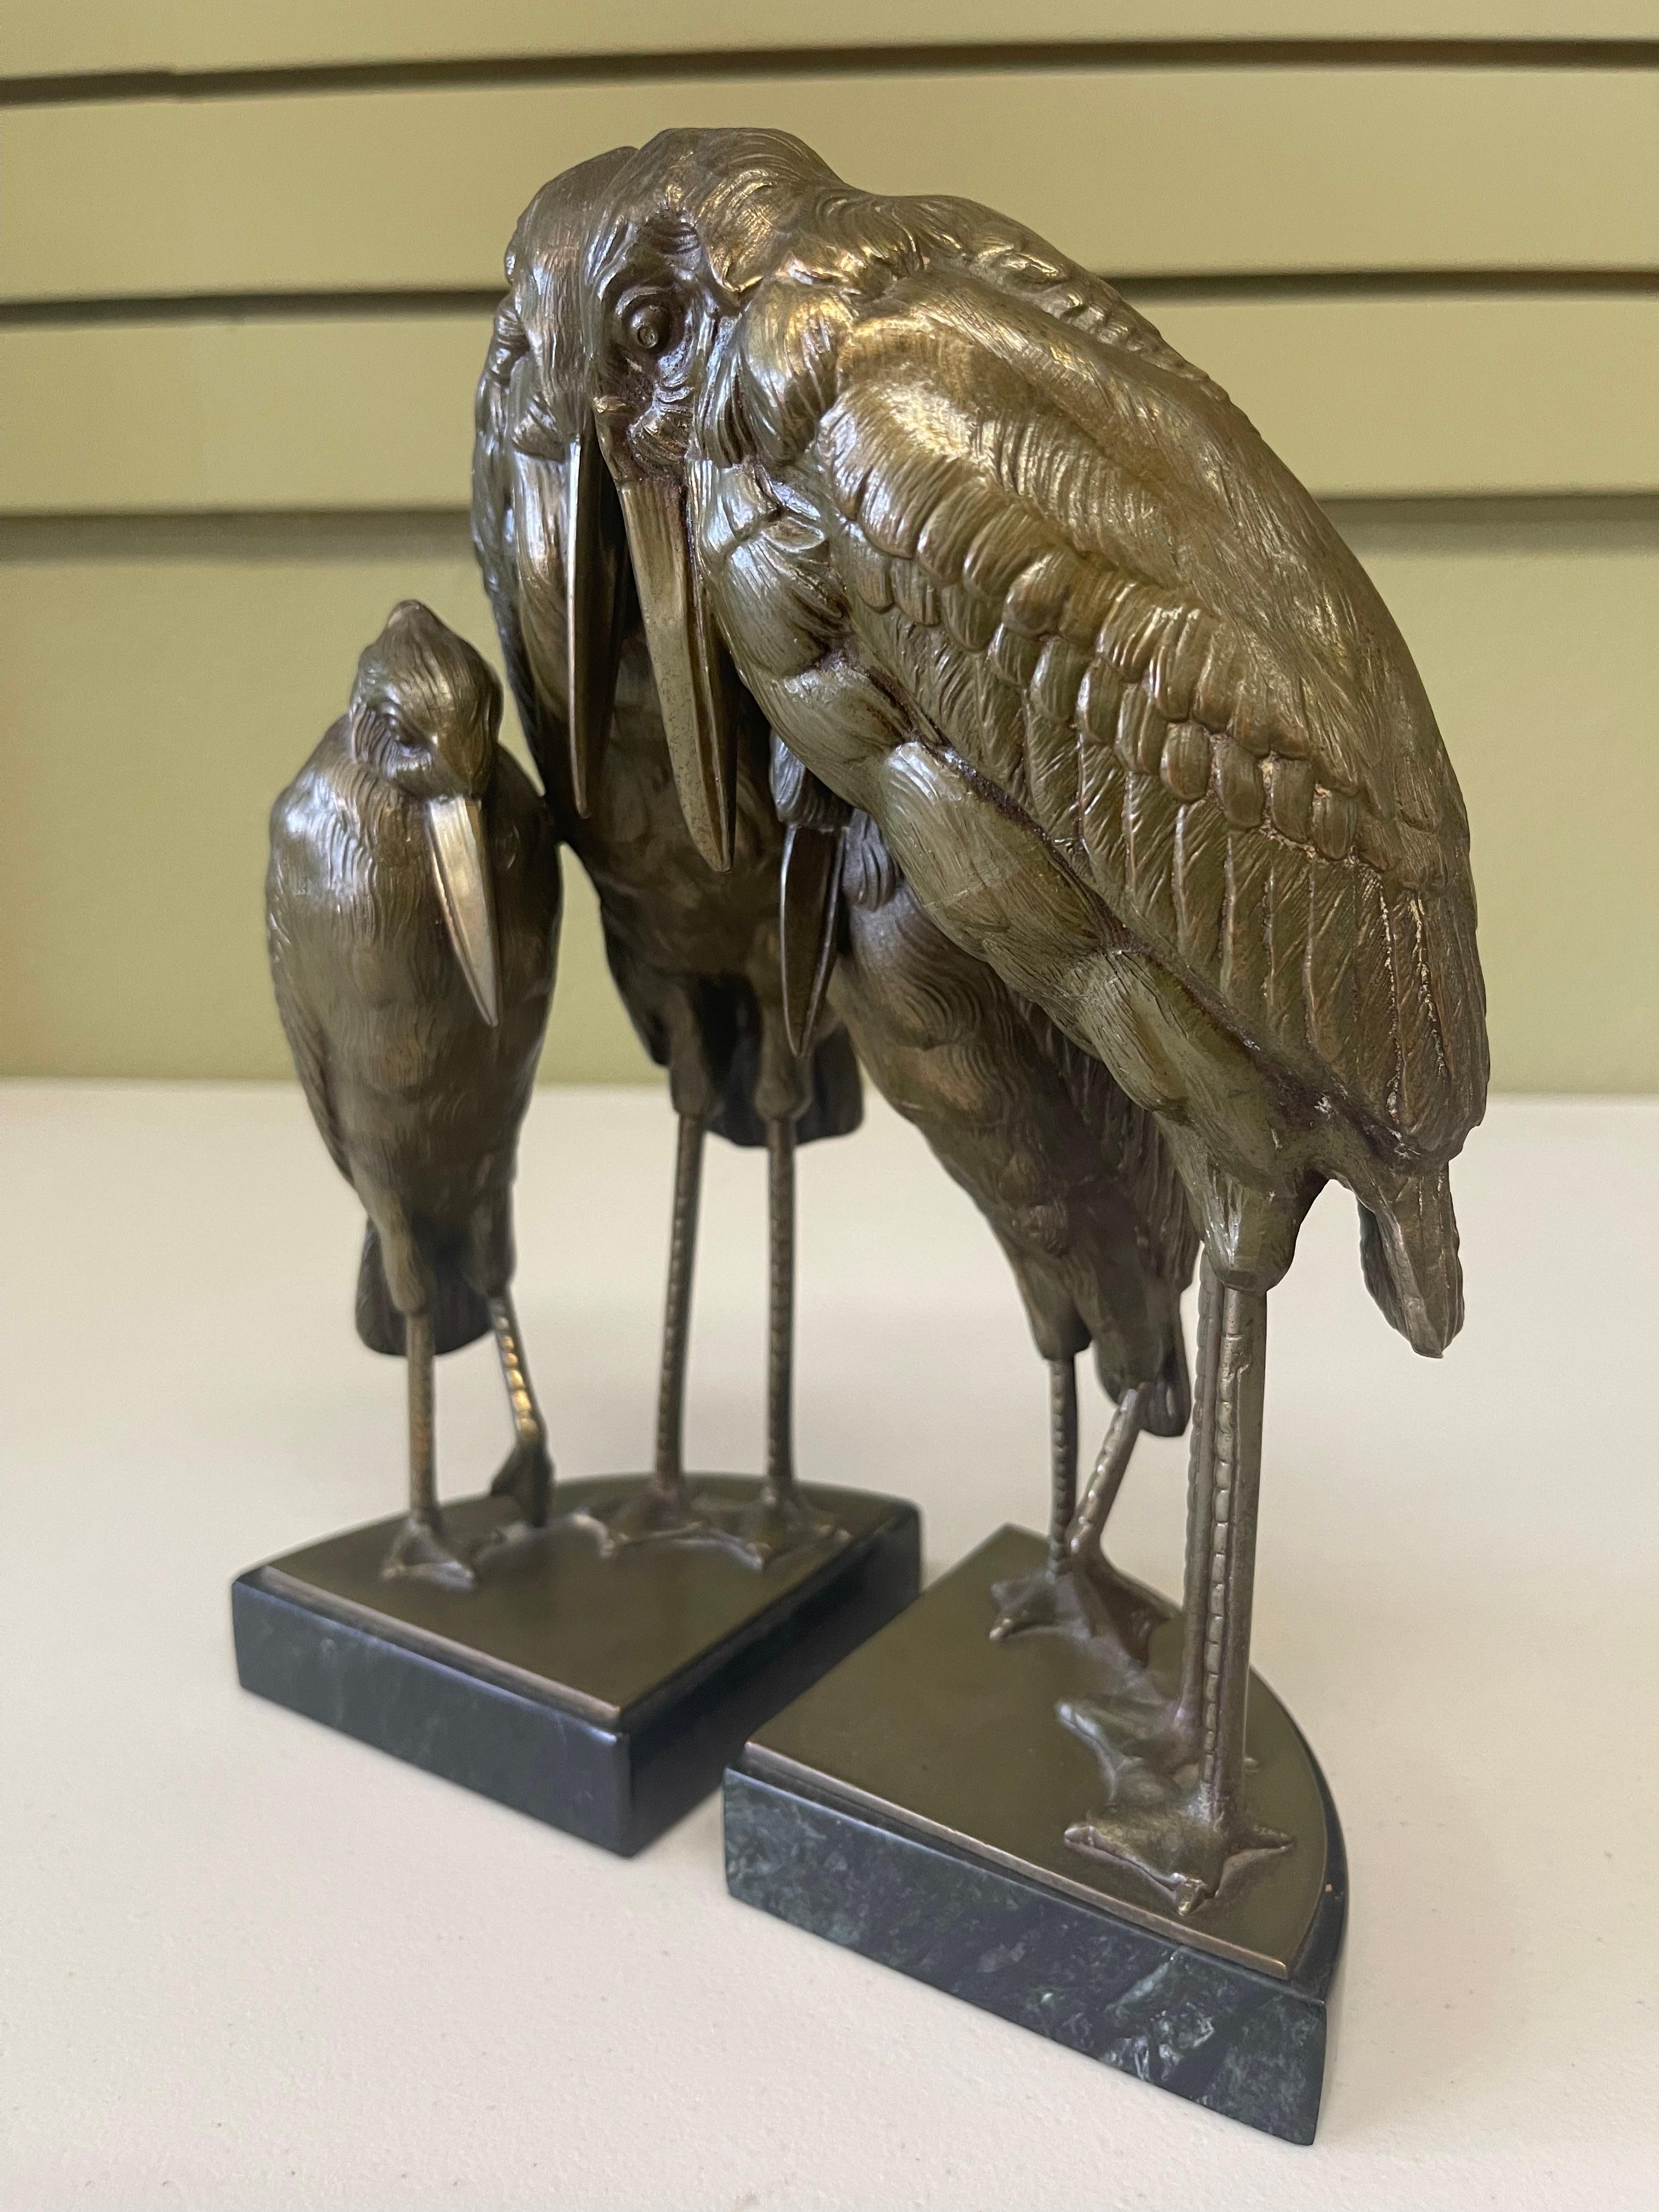 20th Century Pair of Marabou Stork Art Deco Bookends in the Style of Marcel-Andre’ Bouraine